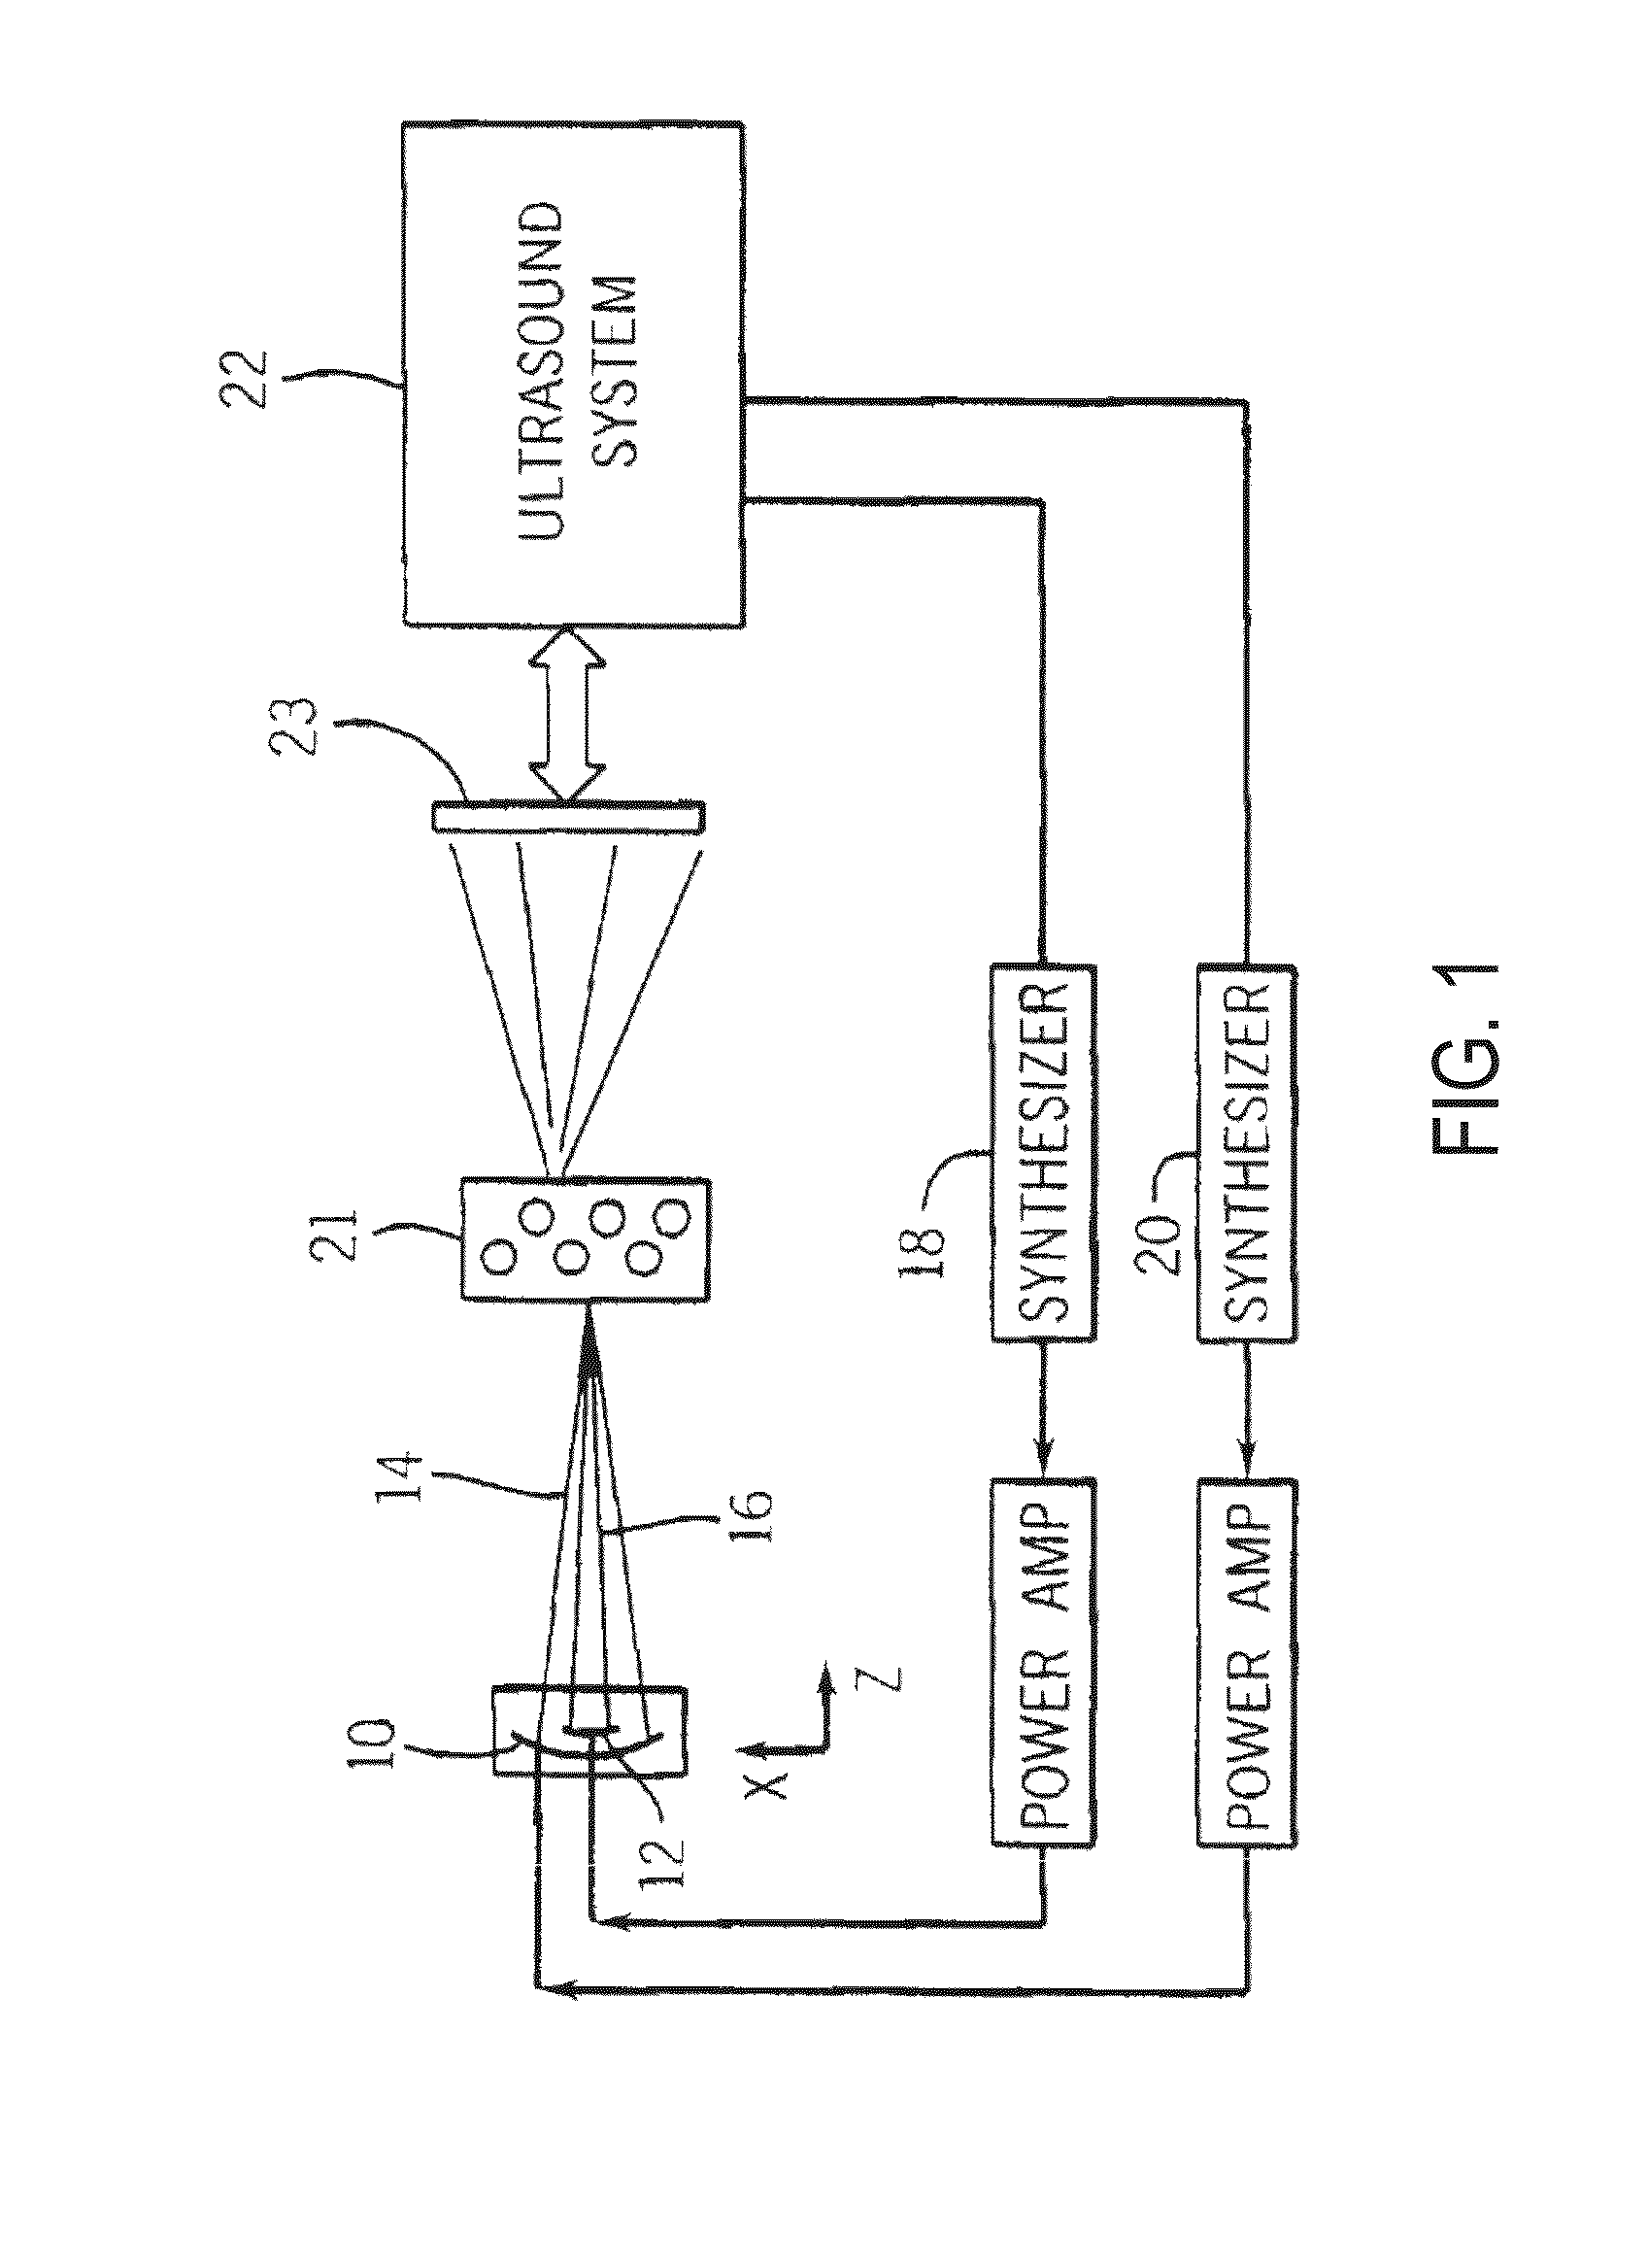 System and method for non-invasive determination of tissue wall viscoelasticity using ultrasound vibrometry